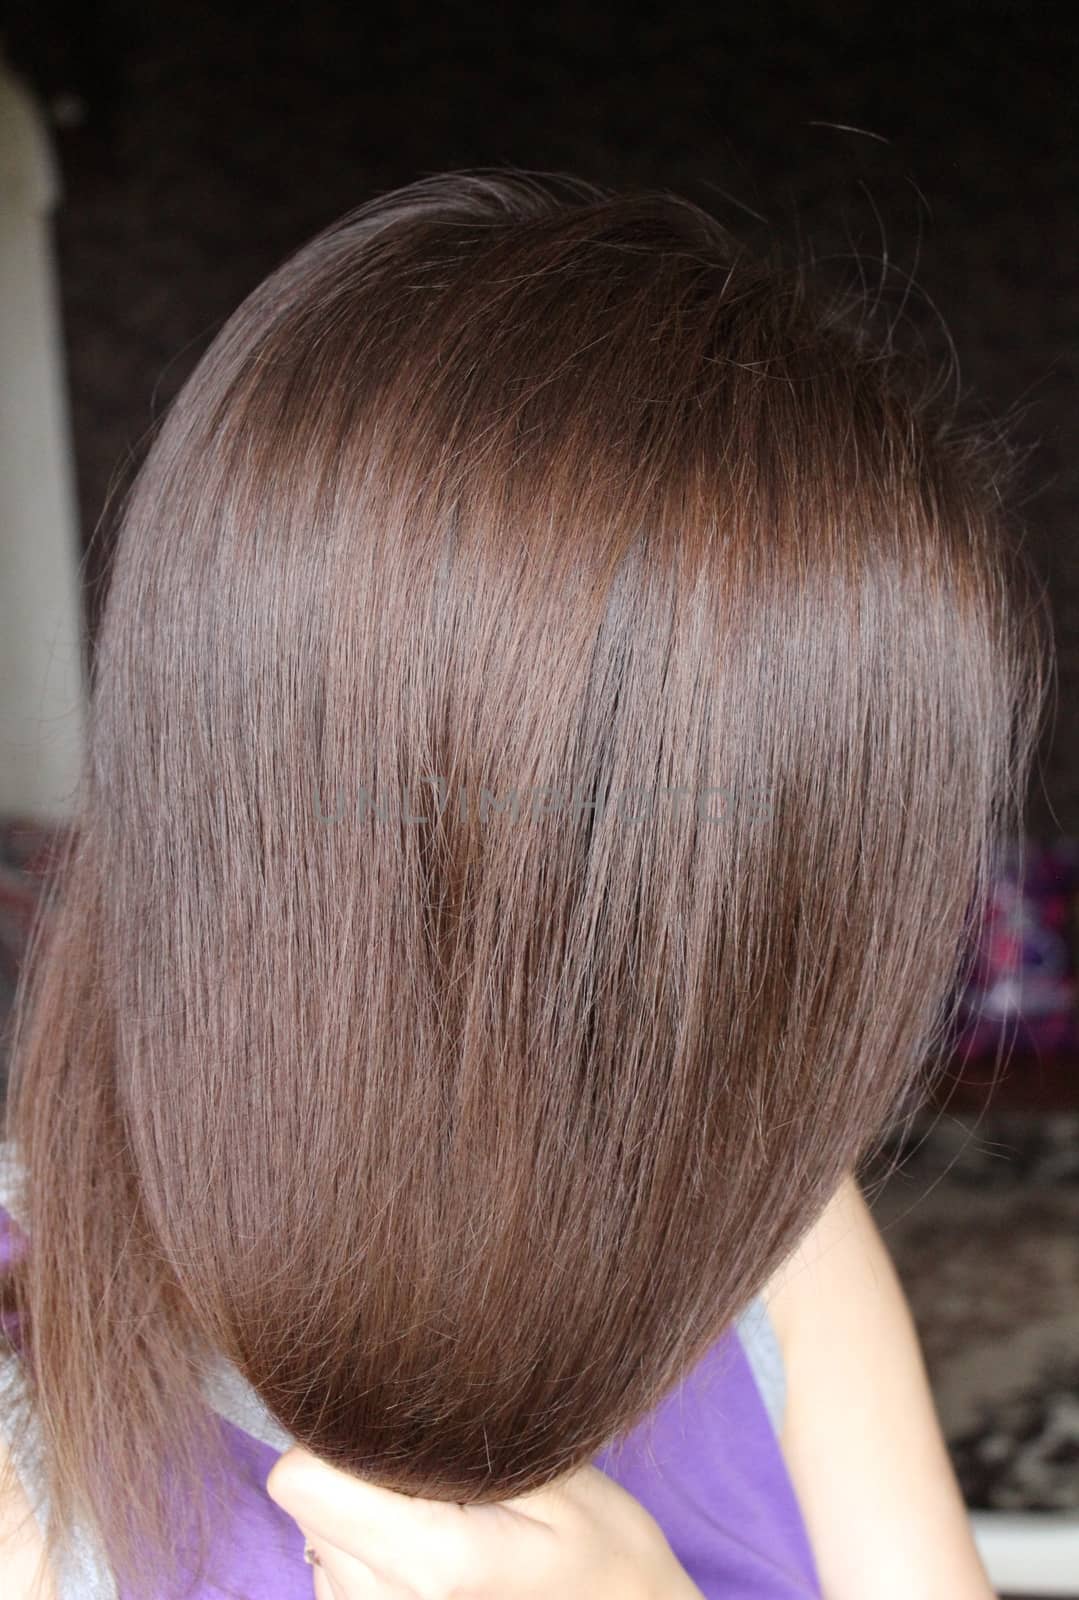 Women's hair is a top view close-up.